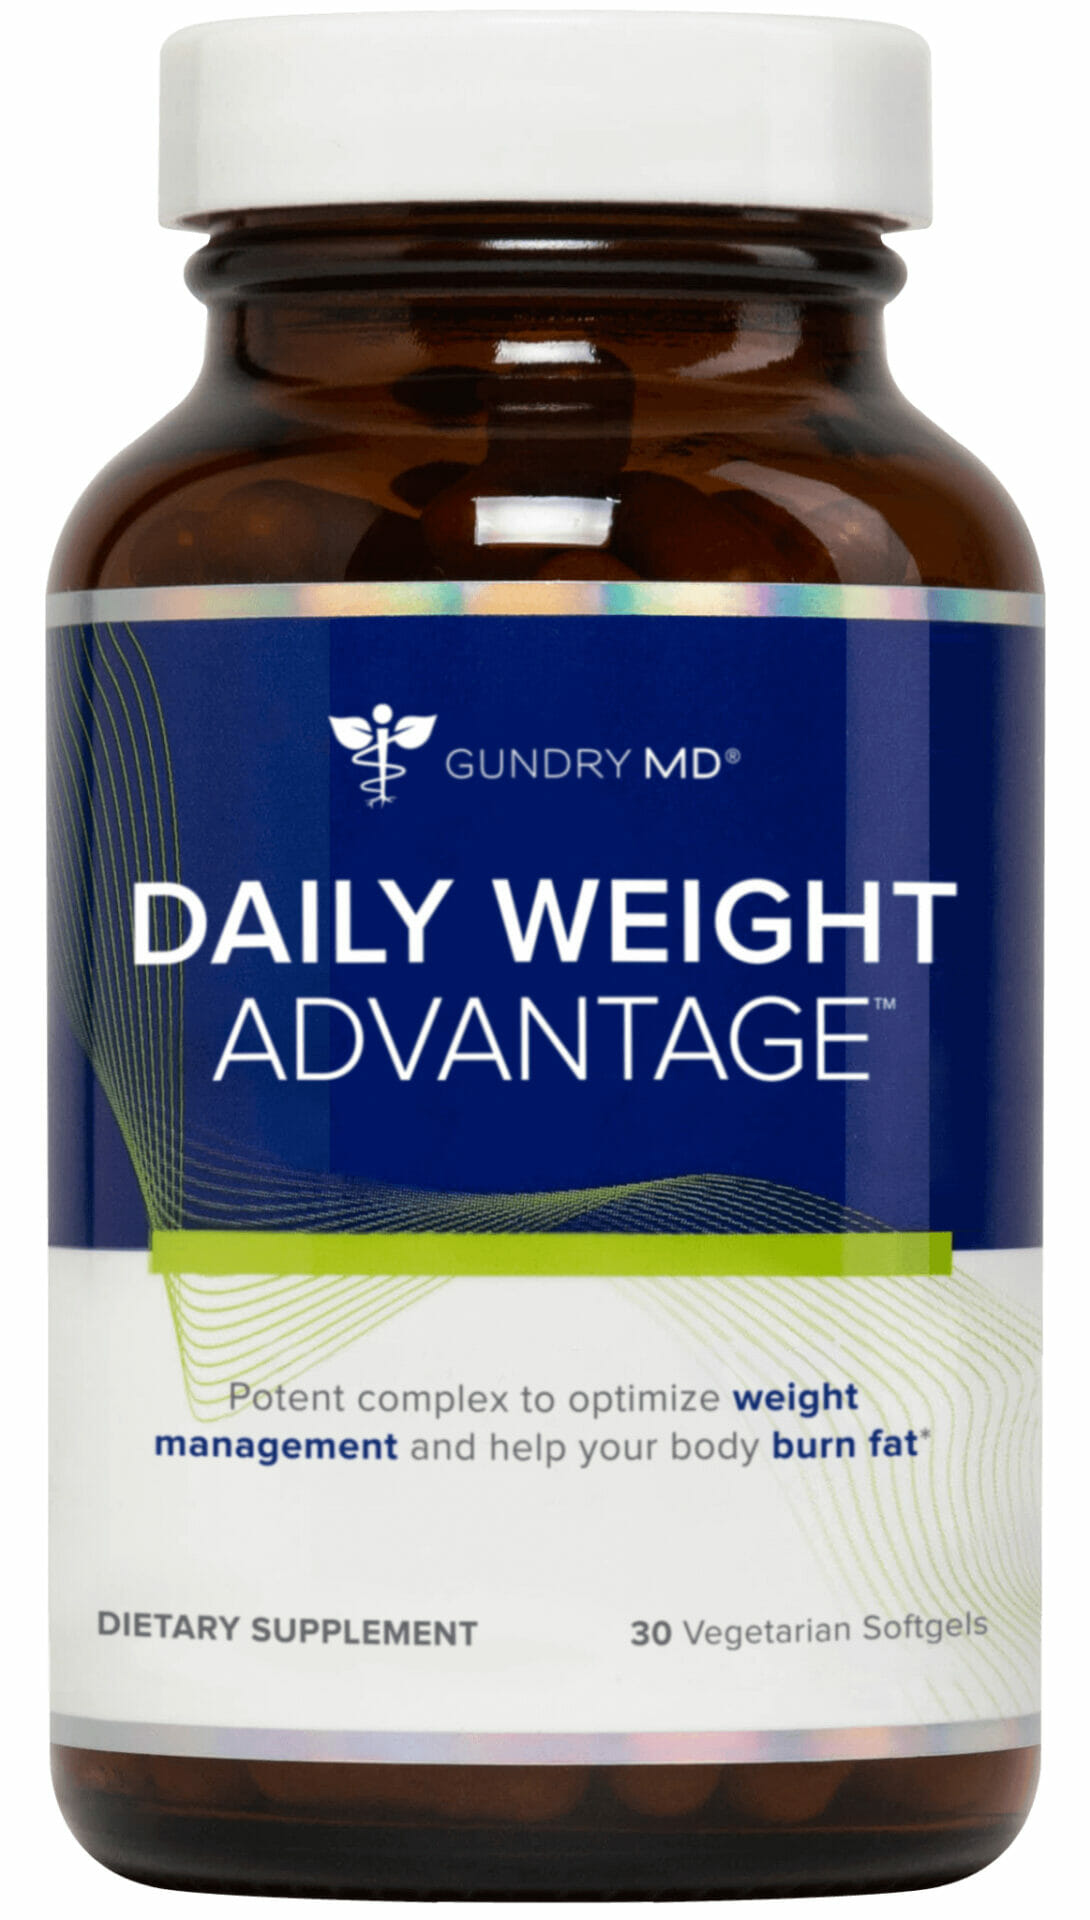 Daily Weight Advantage Review